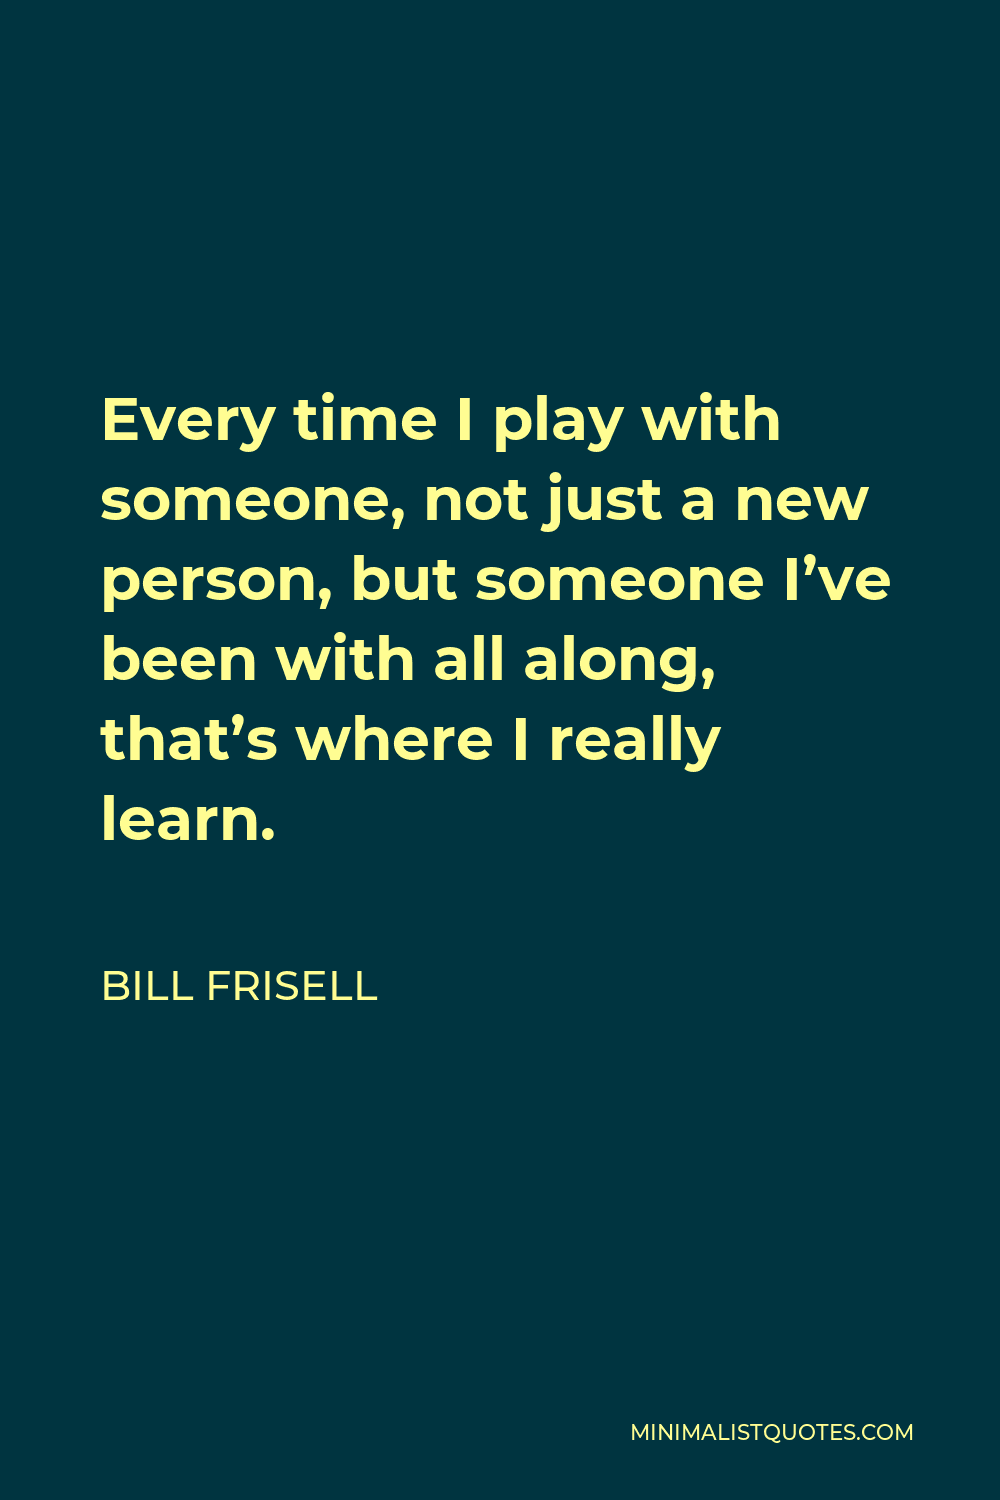 Bill Frisell Quote - Every time I play with someone, not just a new person, but someone I’ve been with all along, that’s where I really learn.